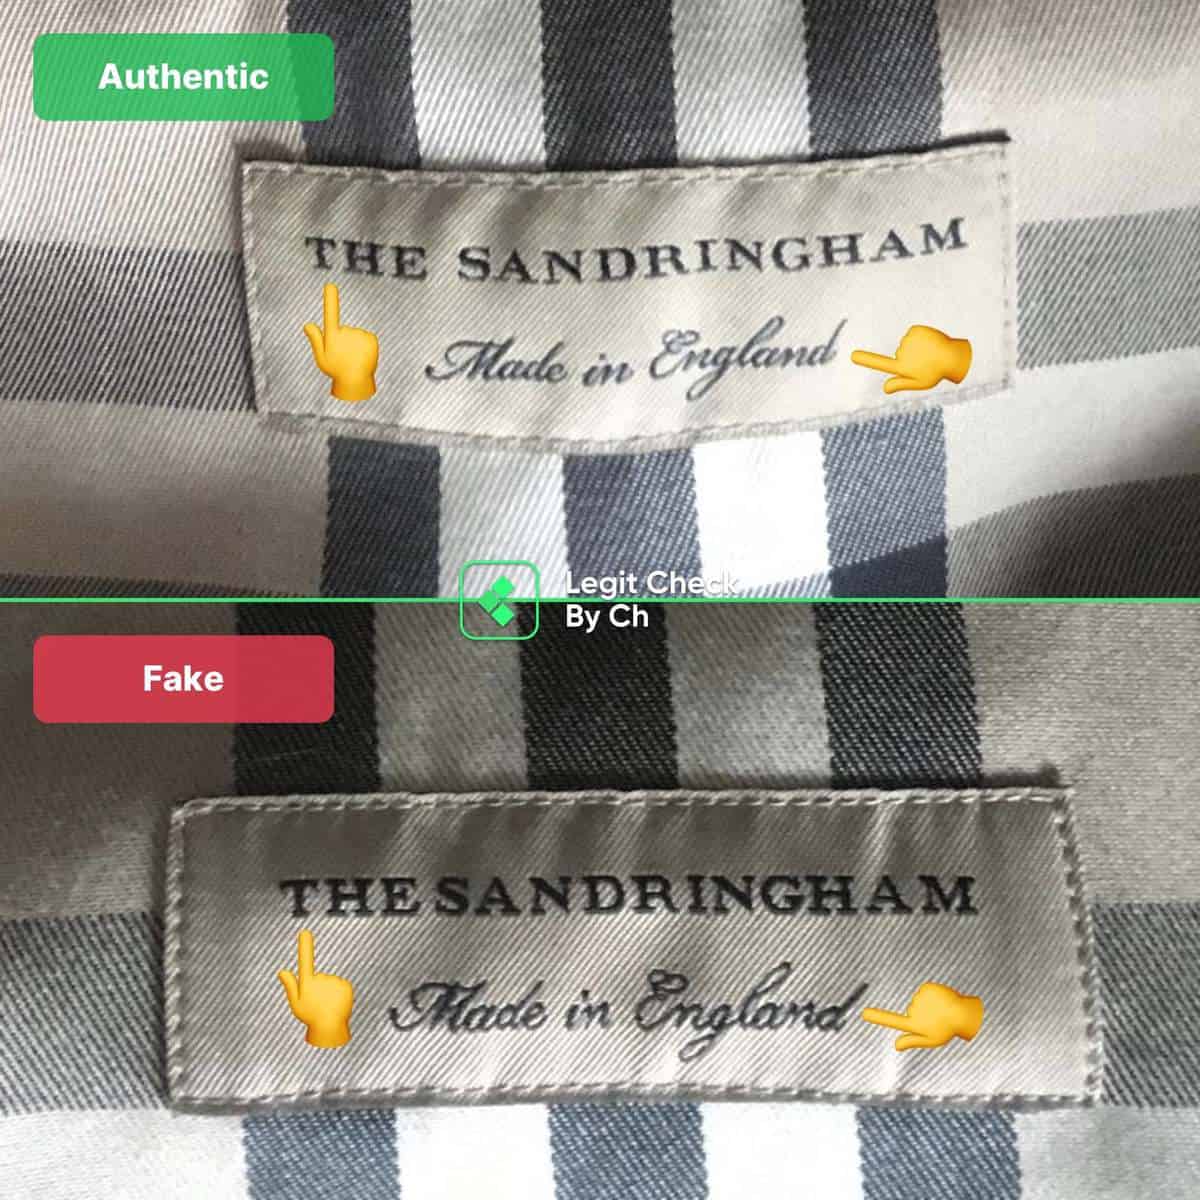 How to Authenticate Burberry Jackets